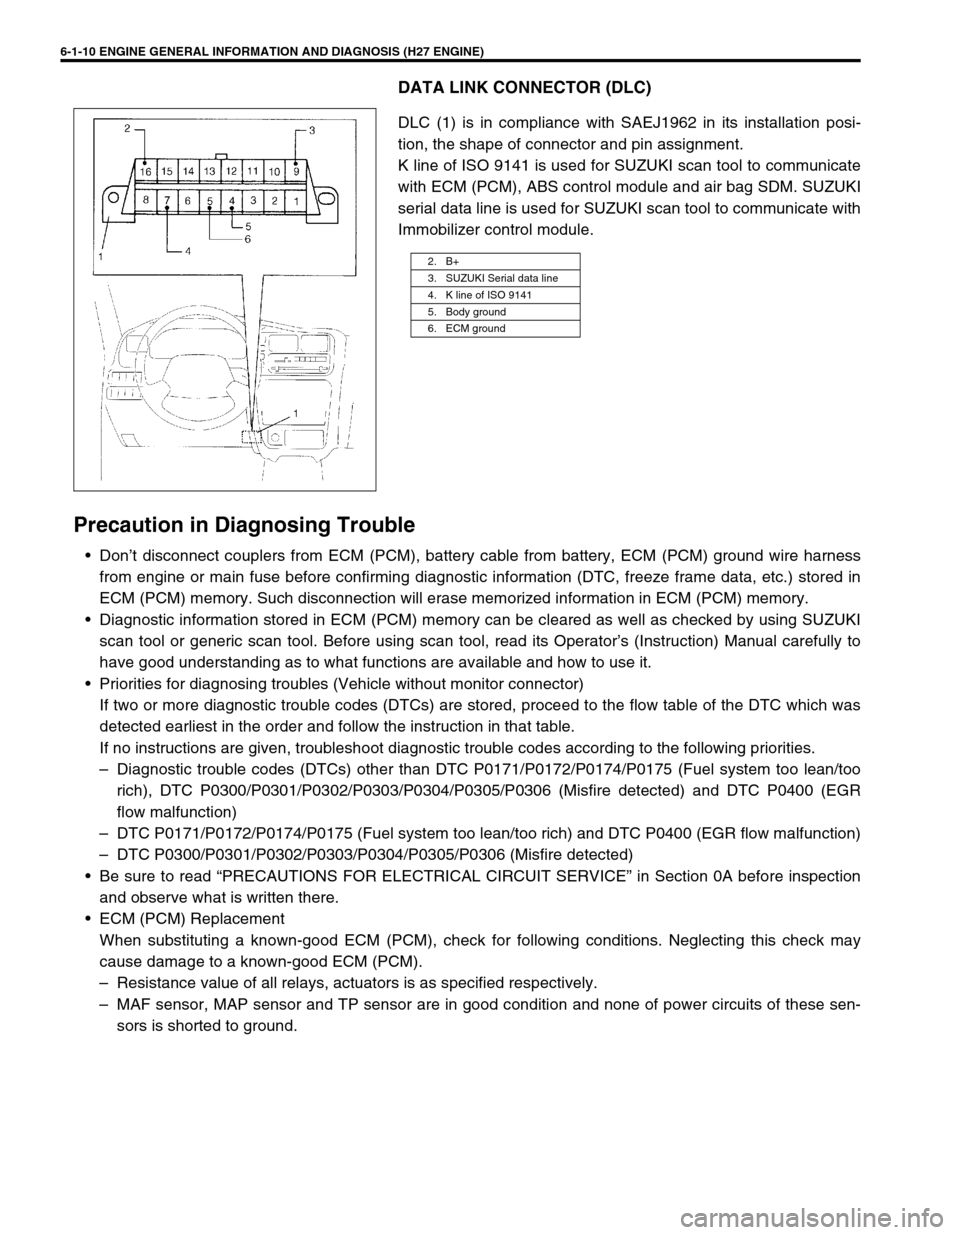 SUZUKI GRAND VITARA 2001 2.G Owners Manual 6-1-10 ENGINE GENERAL INFORMATION AND DIAGNOSIS (H27 ENGINE)
DATA LINK CONNECTOR (DLC)
DLC (1) is in compliance with SAEJ1962 in its installation posi-
tion, the shape of connector and pin assignment.